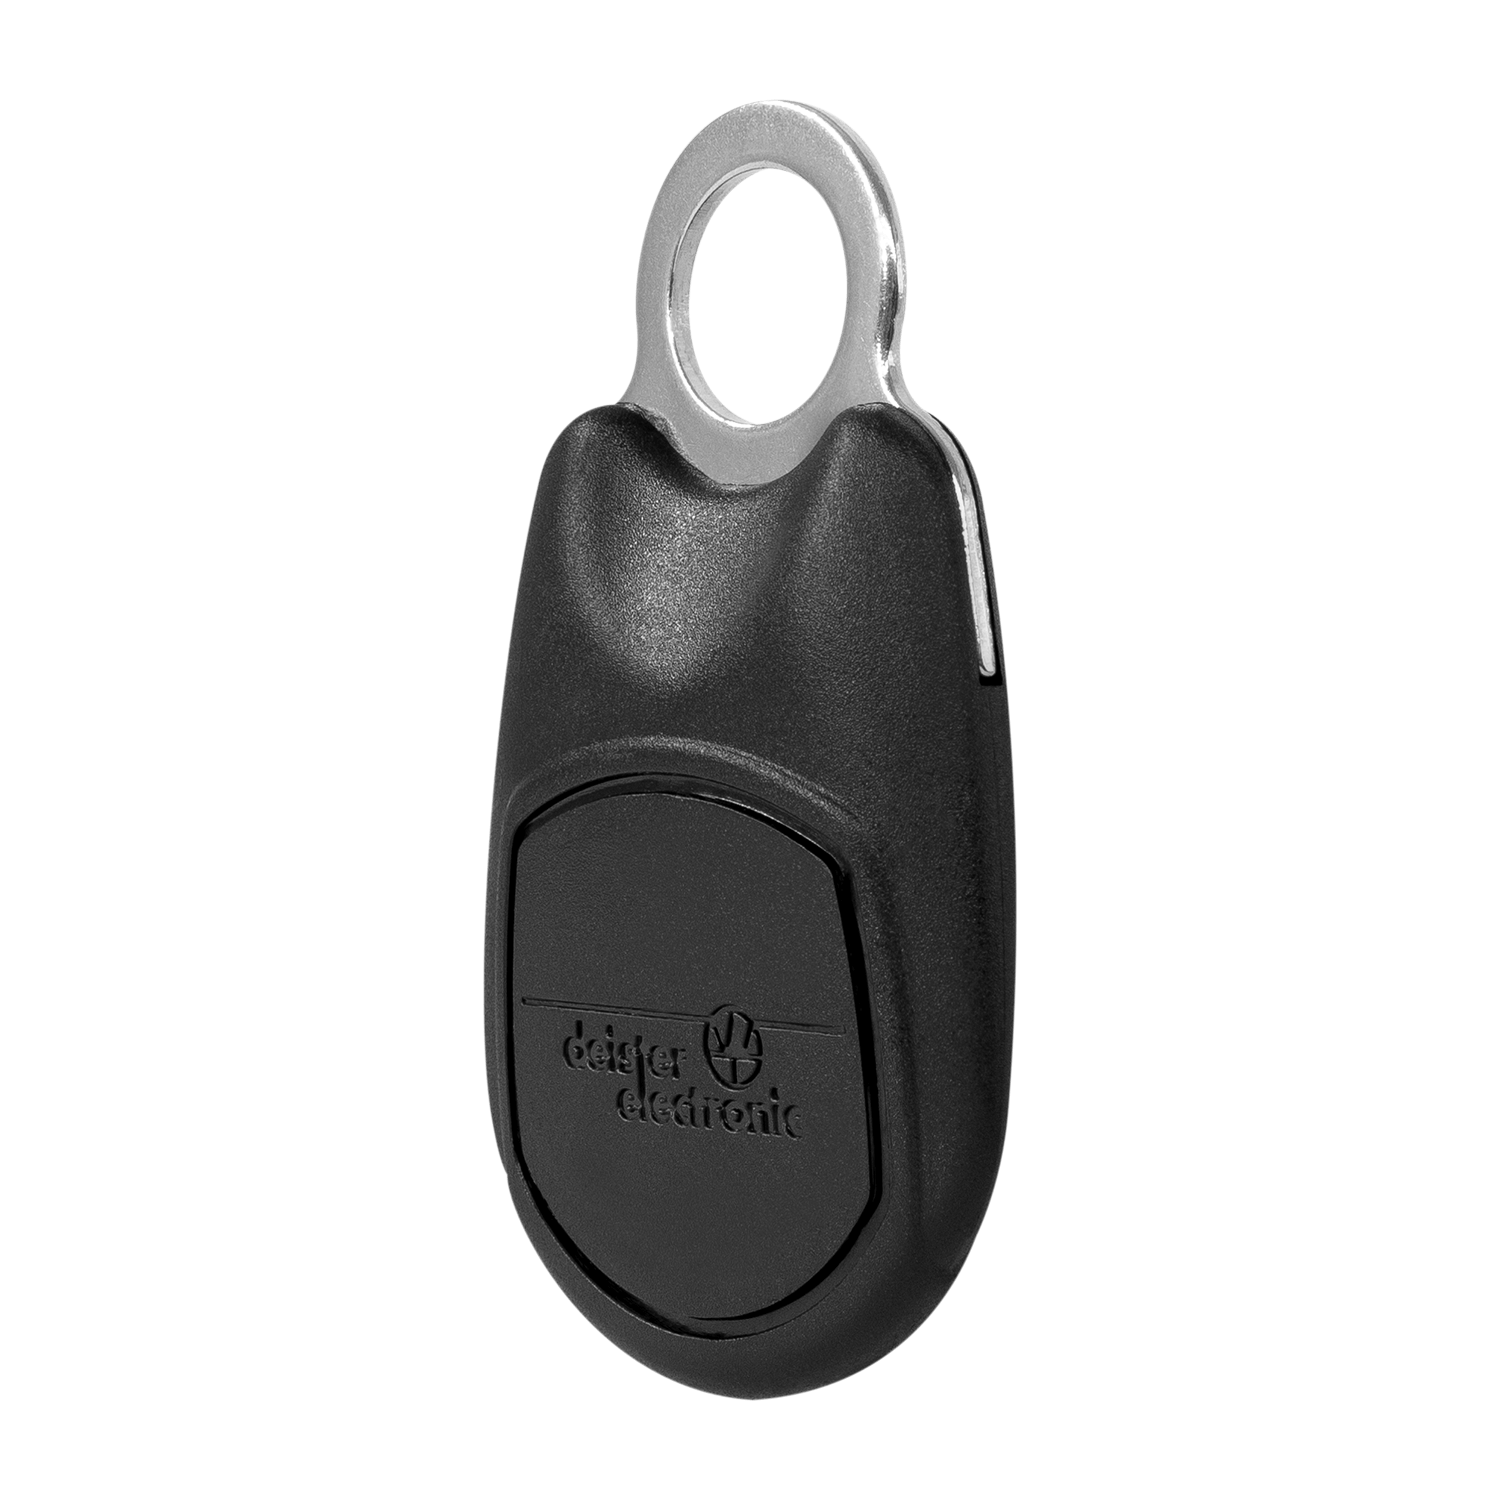 RFID transponder as key fob for access control. Side view